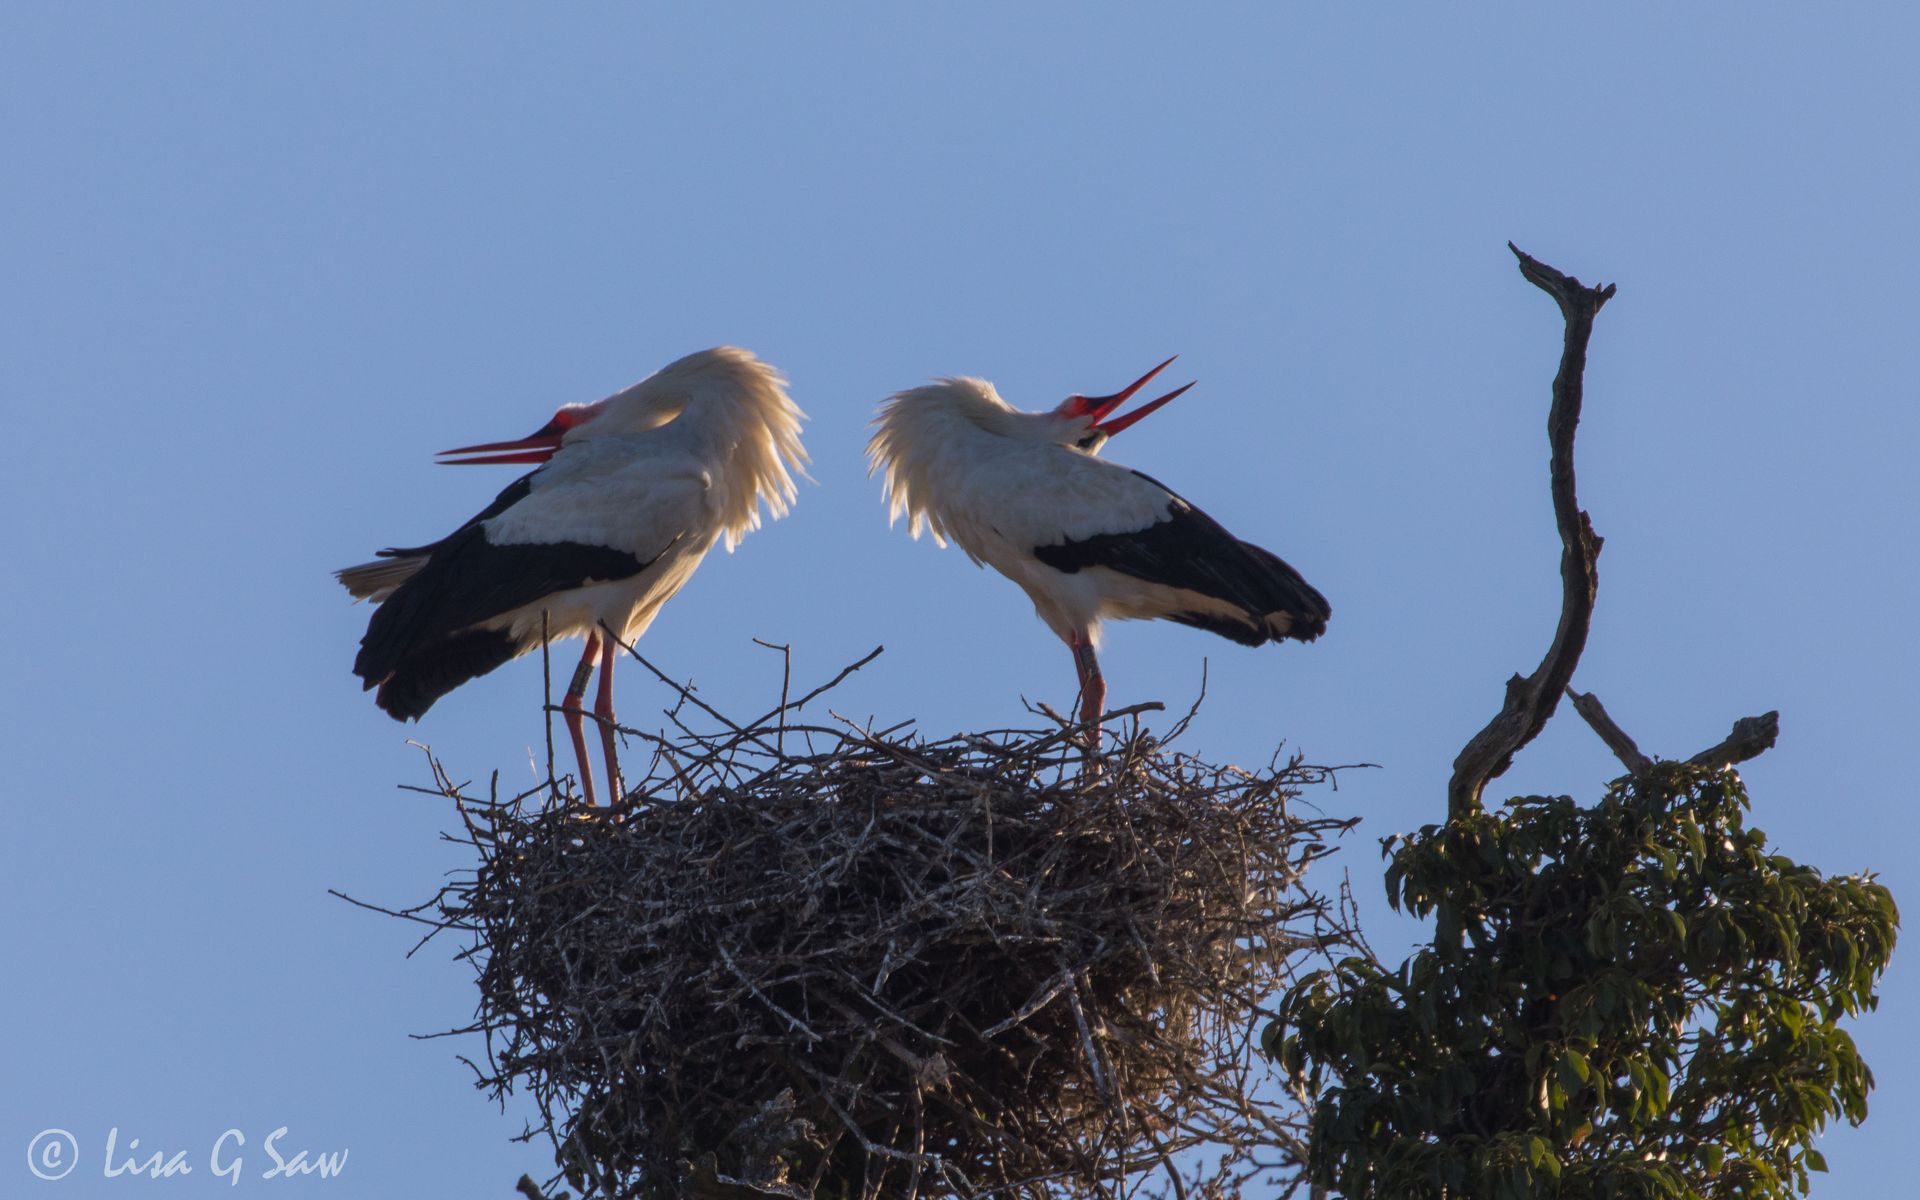 Two White Storks with heads back clicking (pair bonding)